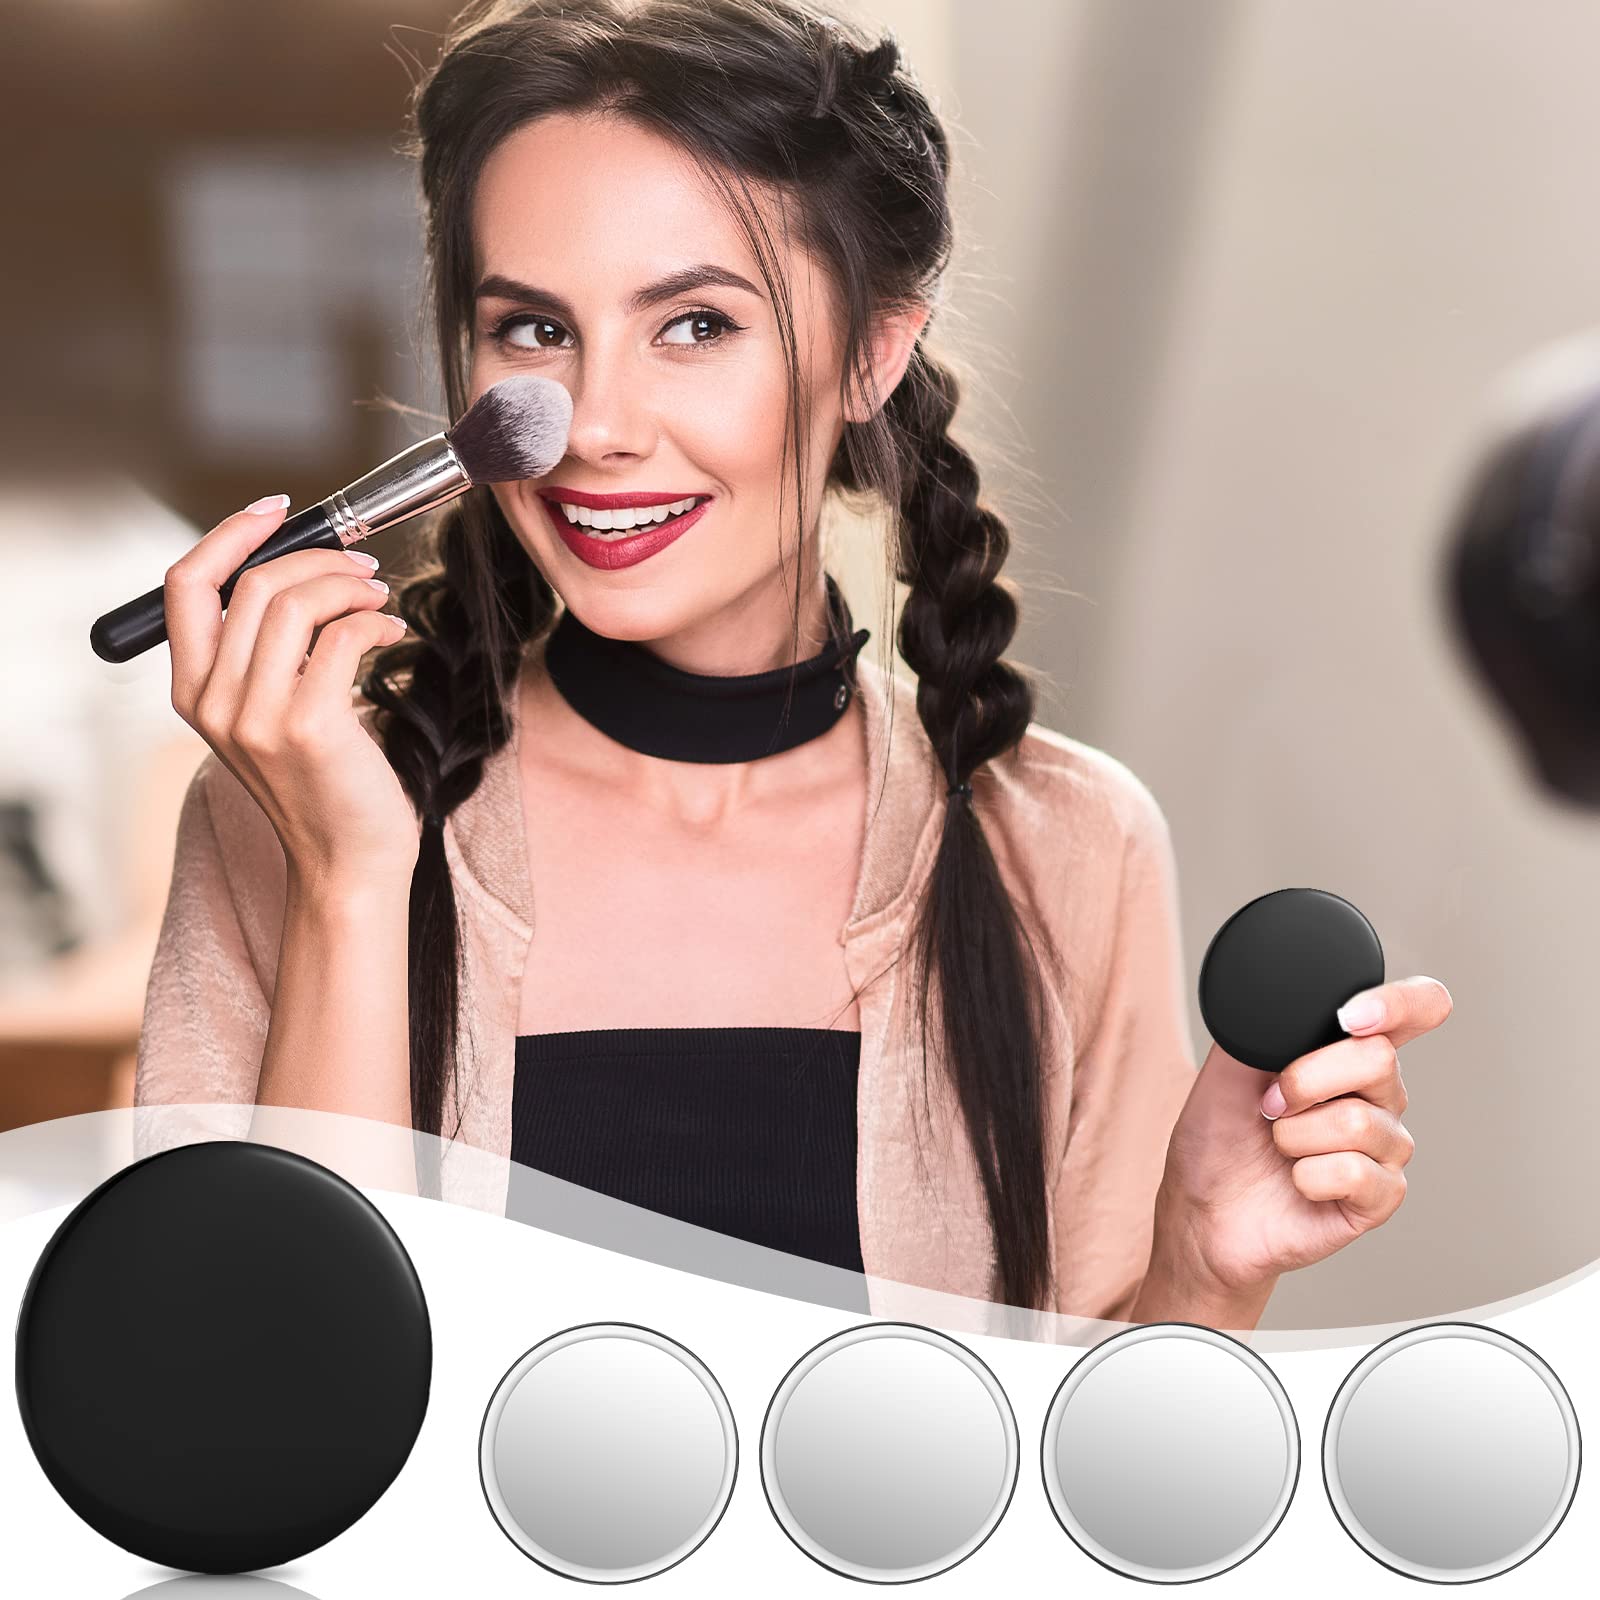 Compact Mirror Round Makeup Glass Mirror Small Pocket Mirror Portable Mini Mirrors Personal Purse Mini Makeup Mirror for Women Girls Gifts Travel Daily Use, 2.76 Inch (Black, 72 Pieces)